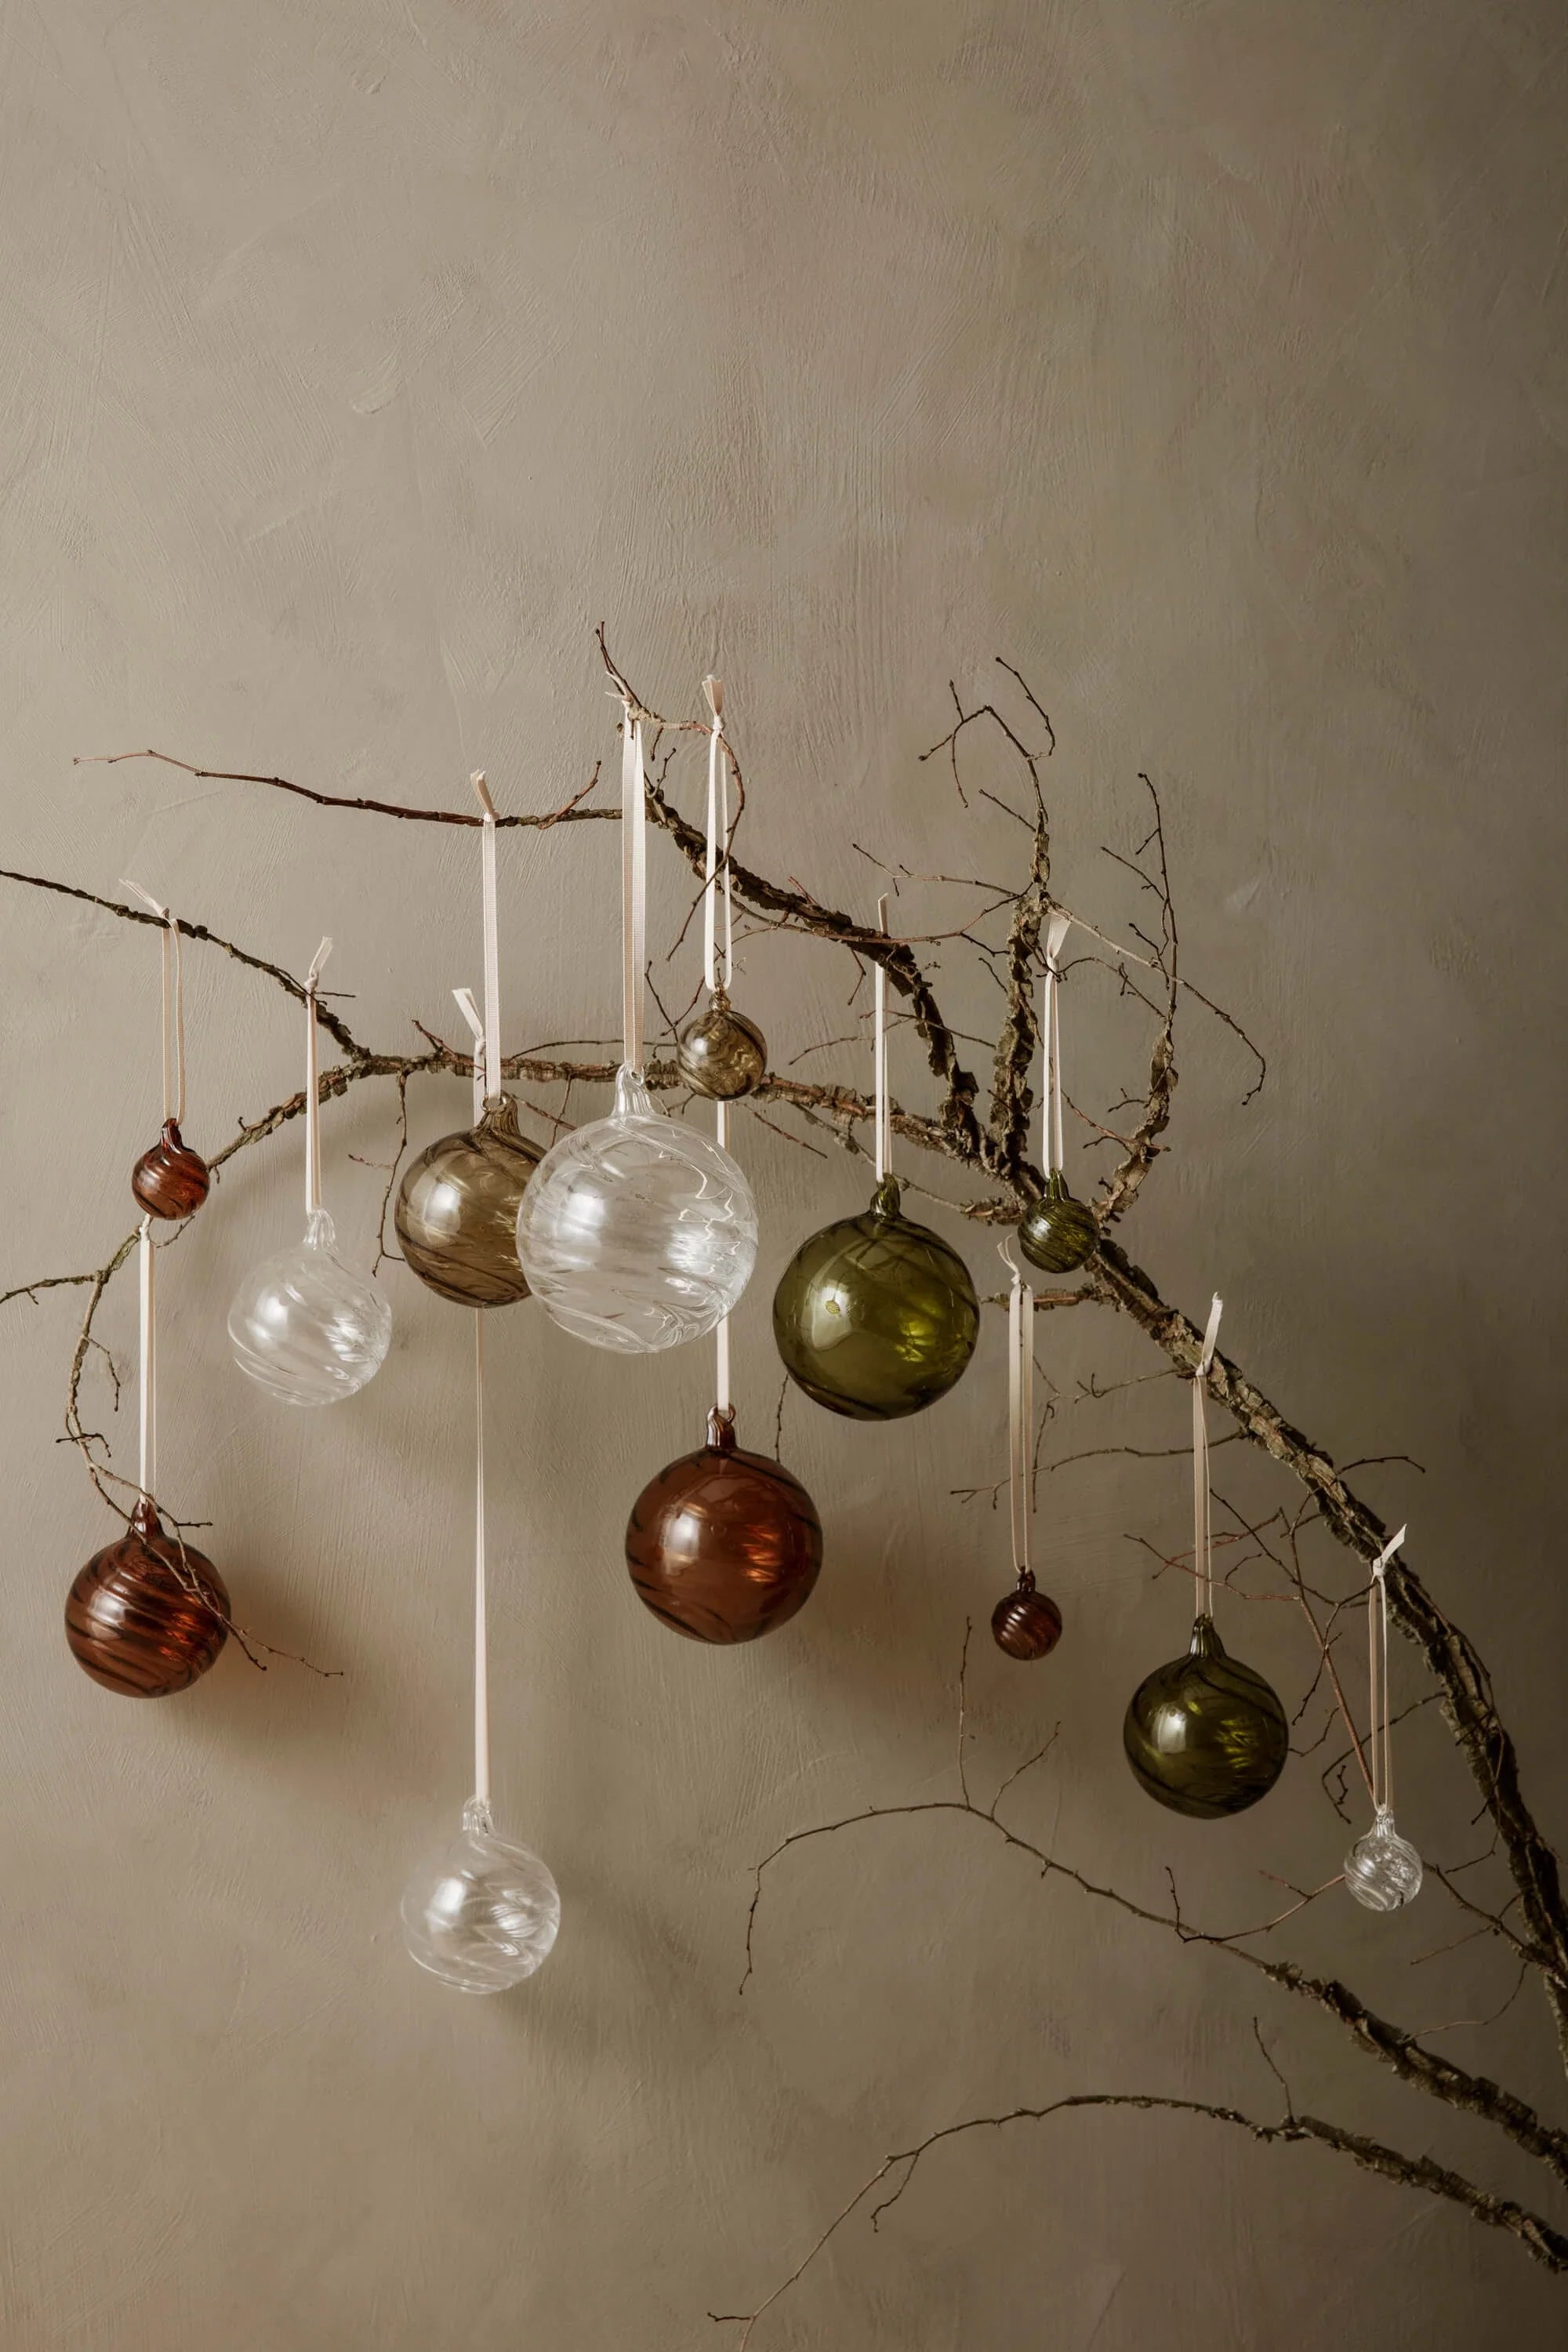 A series of glass festive baubles in various sizes and colours hanging from a single branch against a beige wall